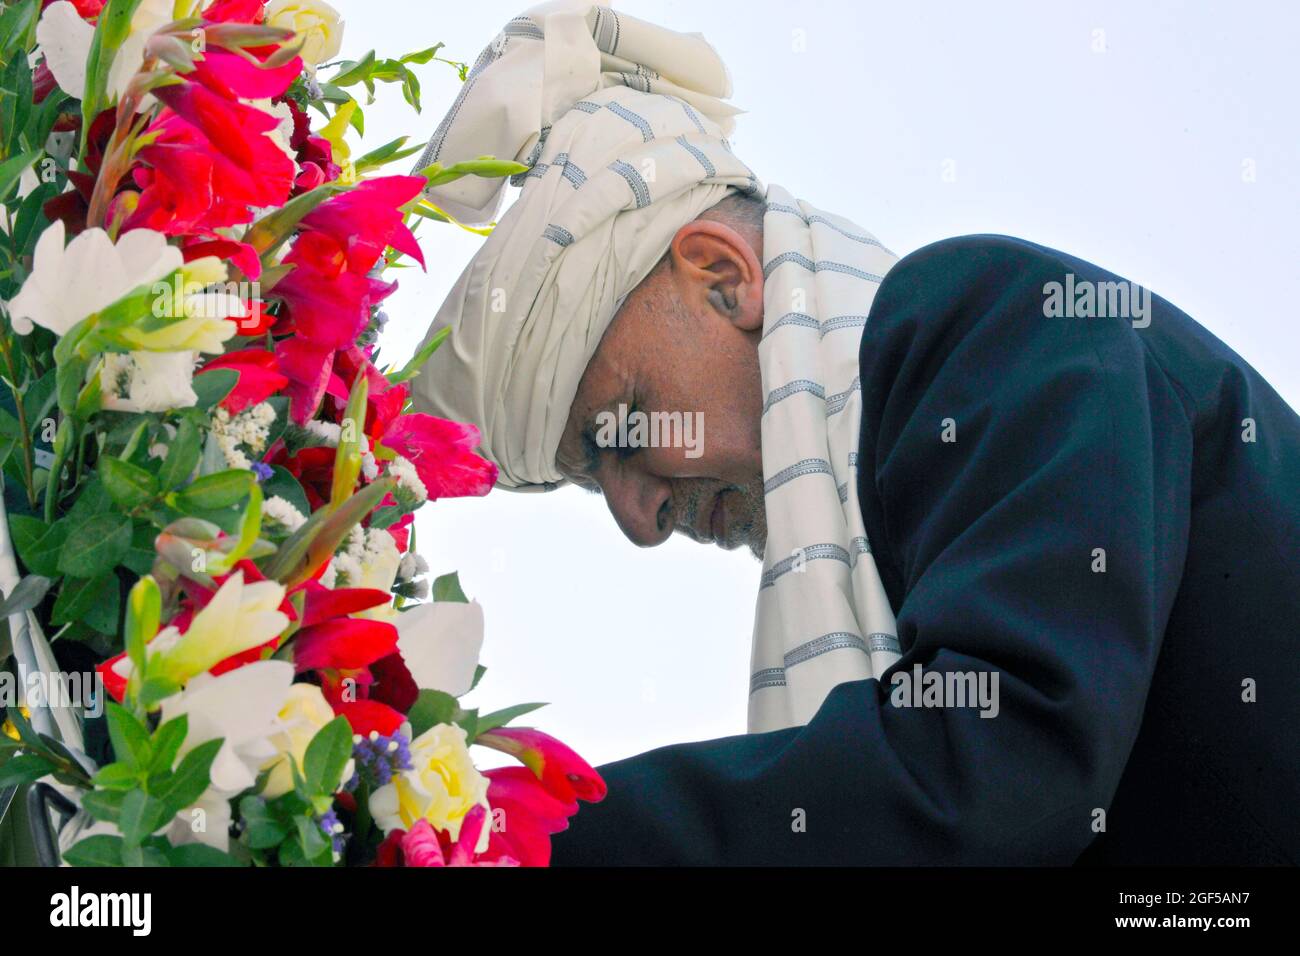 KABUL, Afghanistan (August 19, 2018) H.E President Ashraf Ghani, Afghanistan's president, places a floral wreath at the Independence Memorial during an Afghanistan Independence Day event Aug. 19, 2018, in Kabul, Afghanistan. President Ghani, his cabinet members, and Resolute Support Mission senior leadership attended the event celebrating the 99th anniversary of Afghan independence. (U.S. Air Force photo by Tech. Sgt. Sharida Jackson) Stock Photo